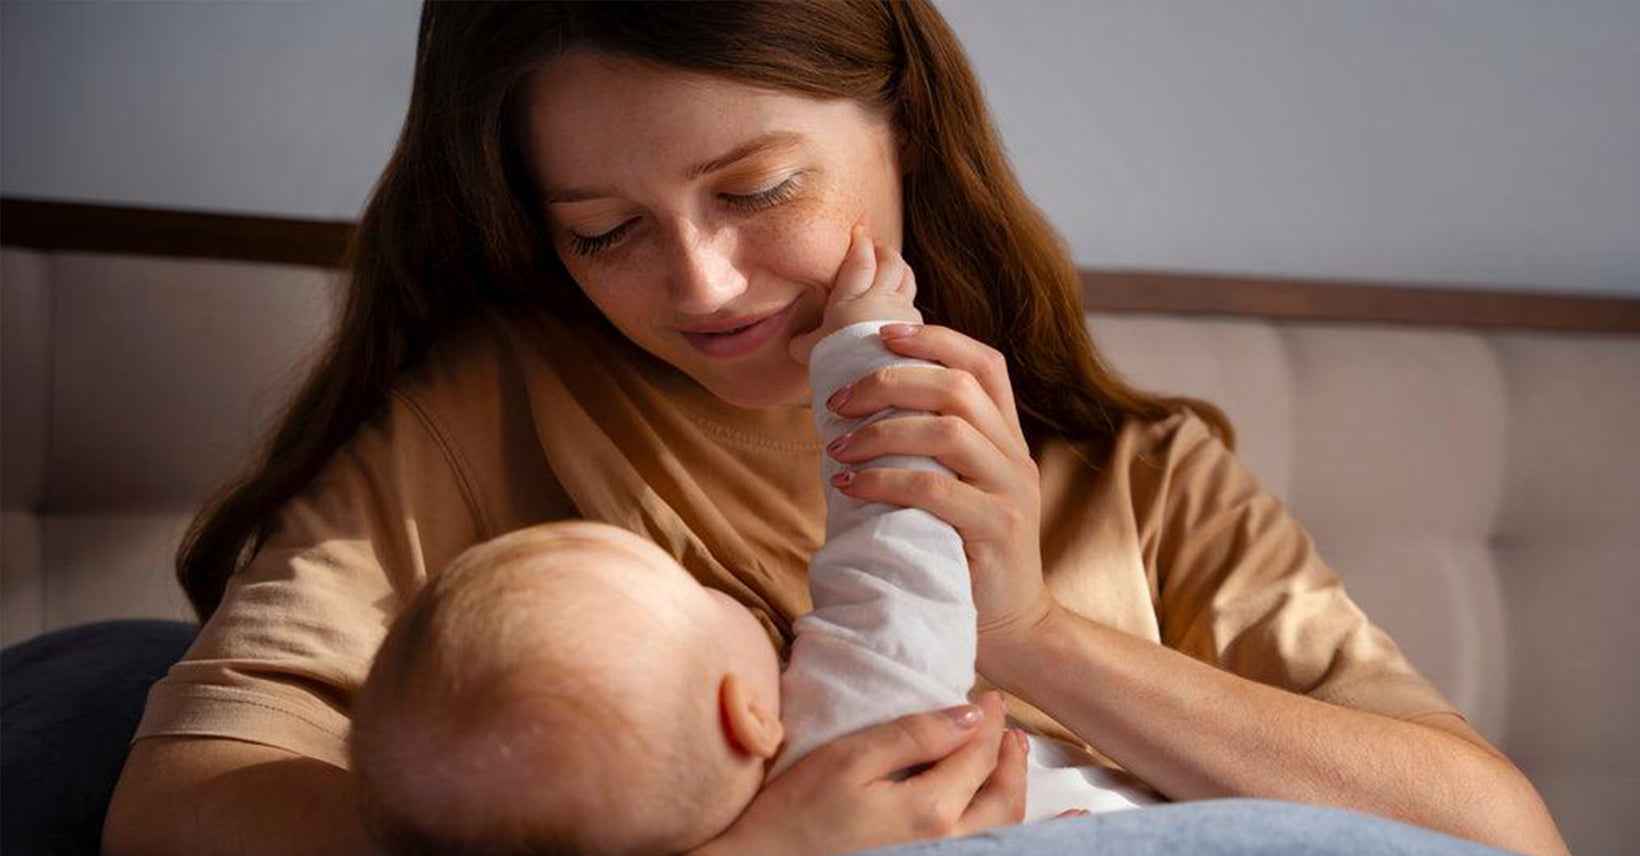 At What Age can Babies Sleep Through the Night Without Feeding?